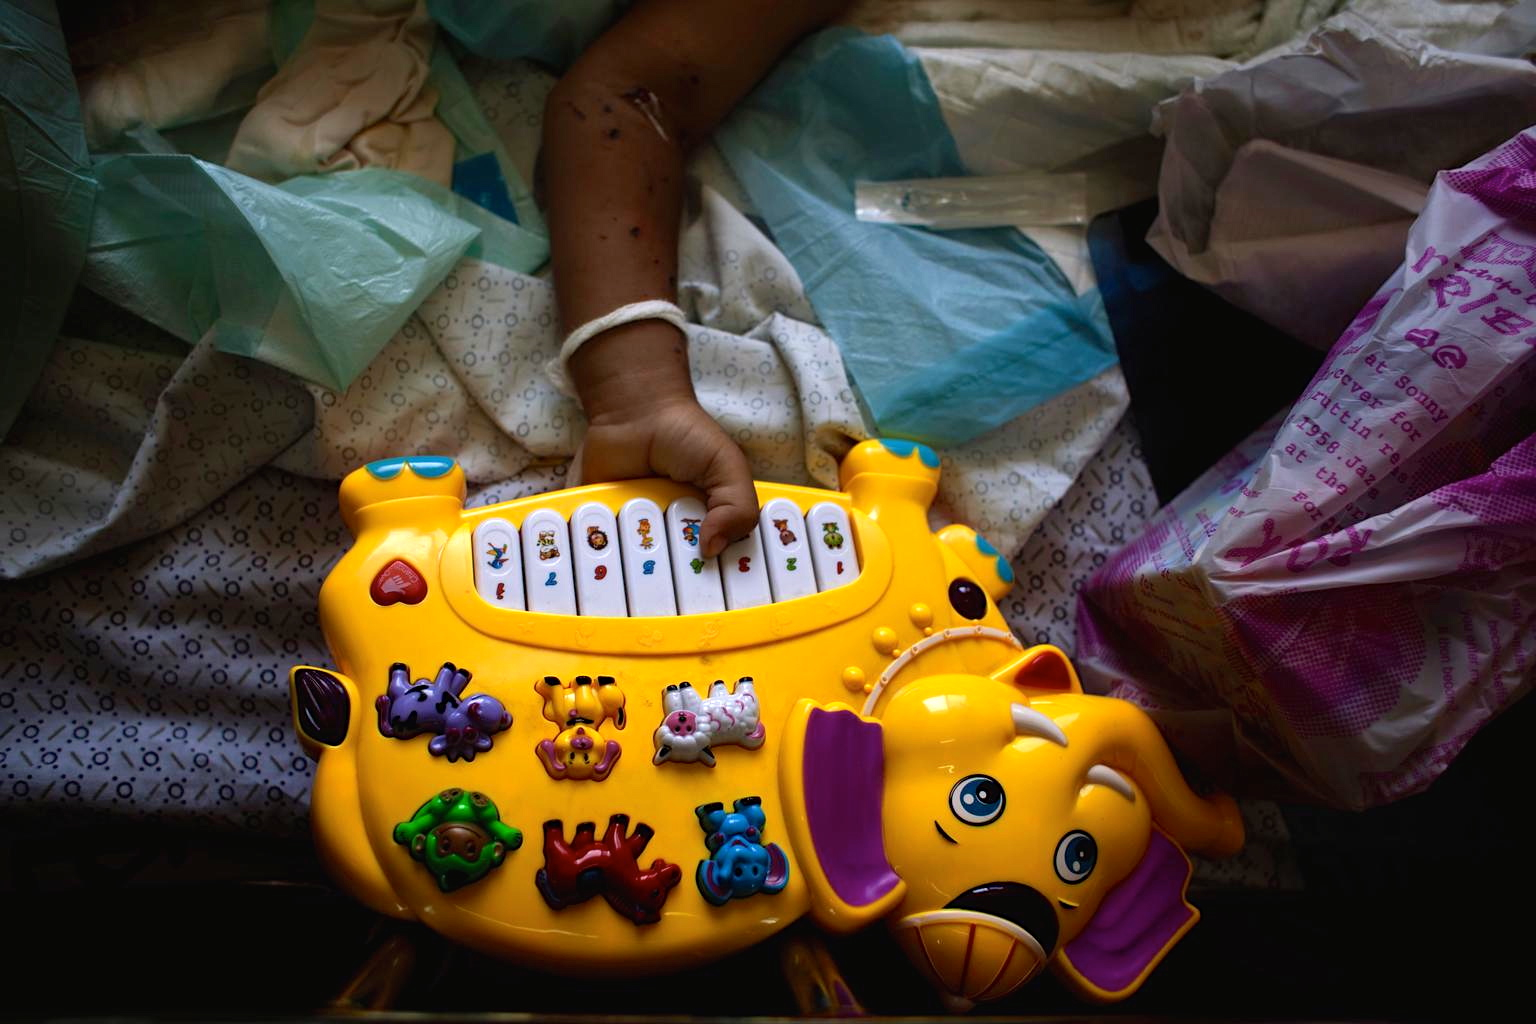 A wounded girl plays with a toy while recovering at Al-Shifa Hospital in Gaza. © UNICEF/NYHQ2014-1038/d’Aki